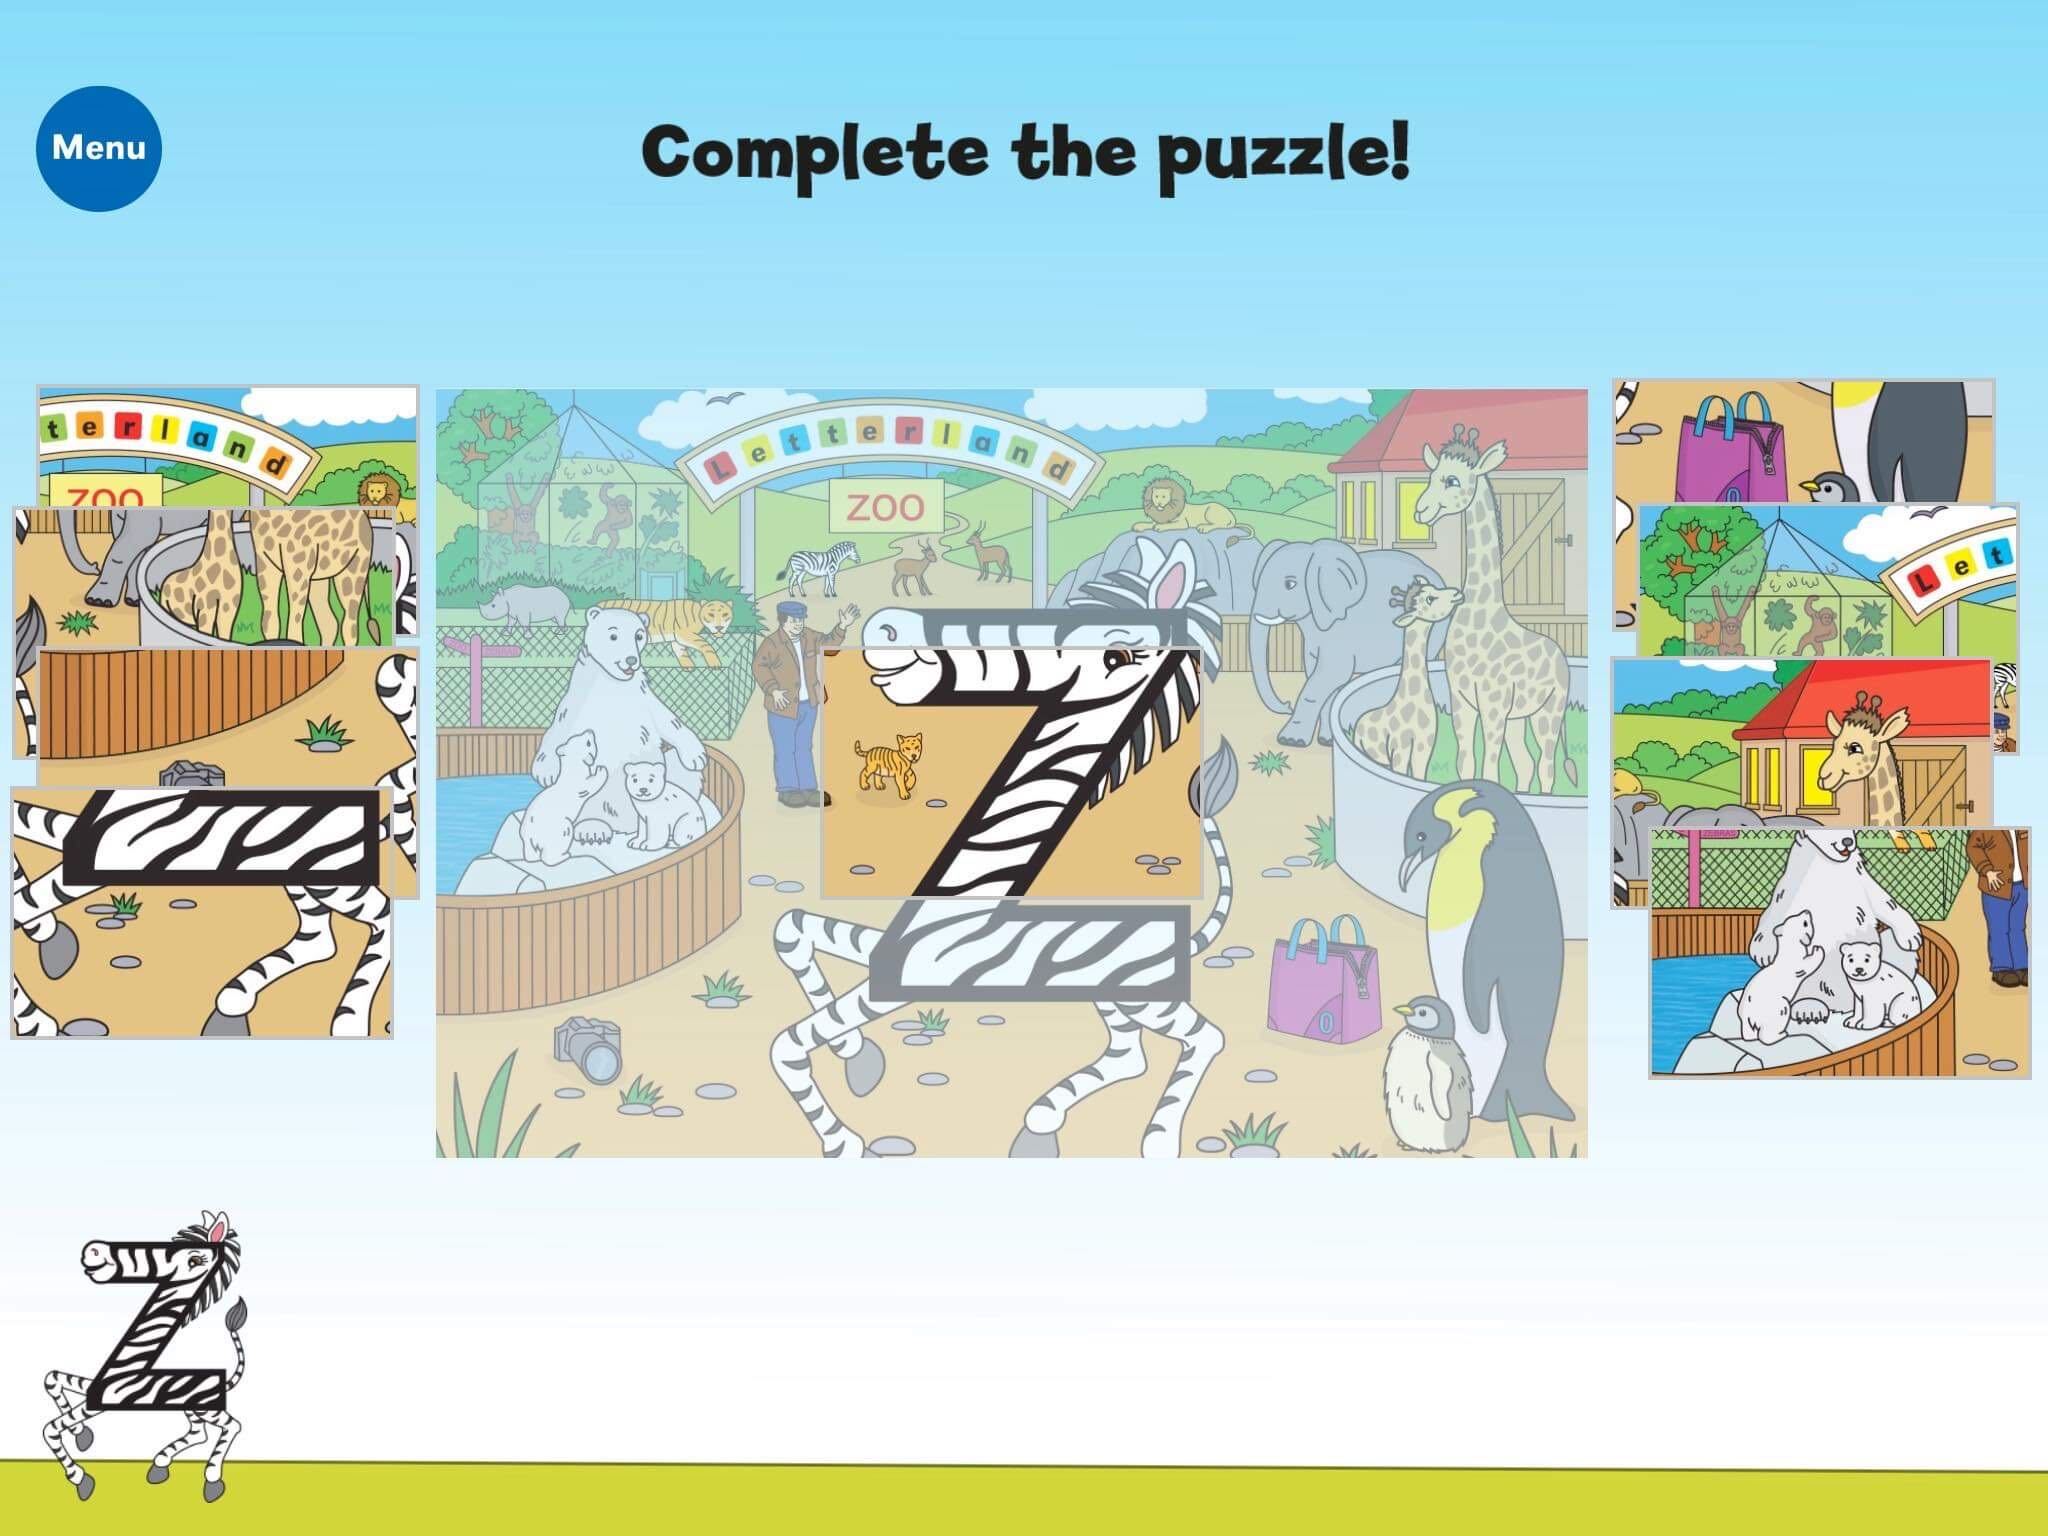 Example image on a tablet screen of LETTERLAND